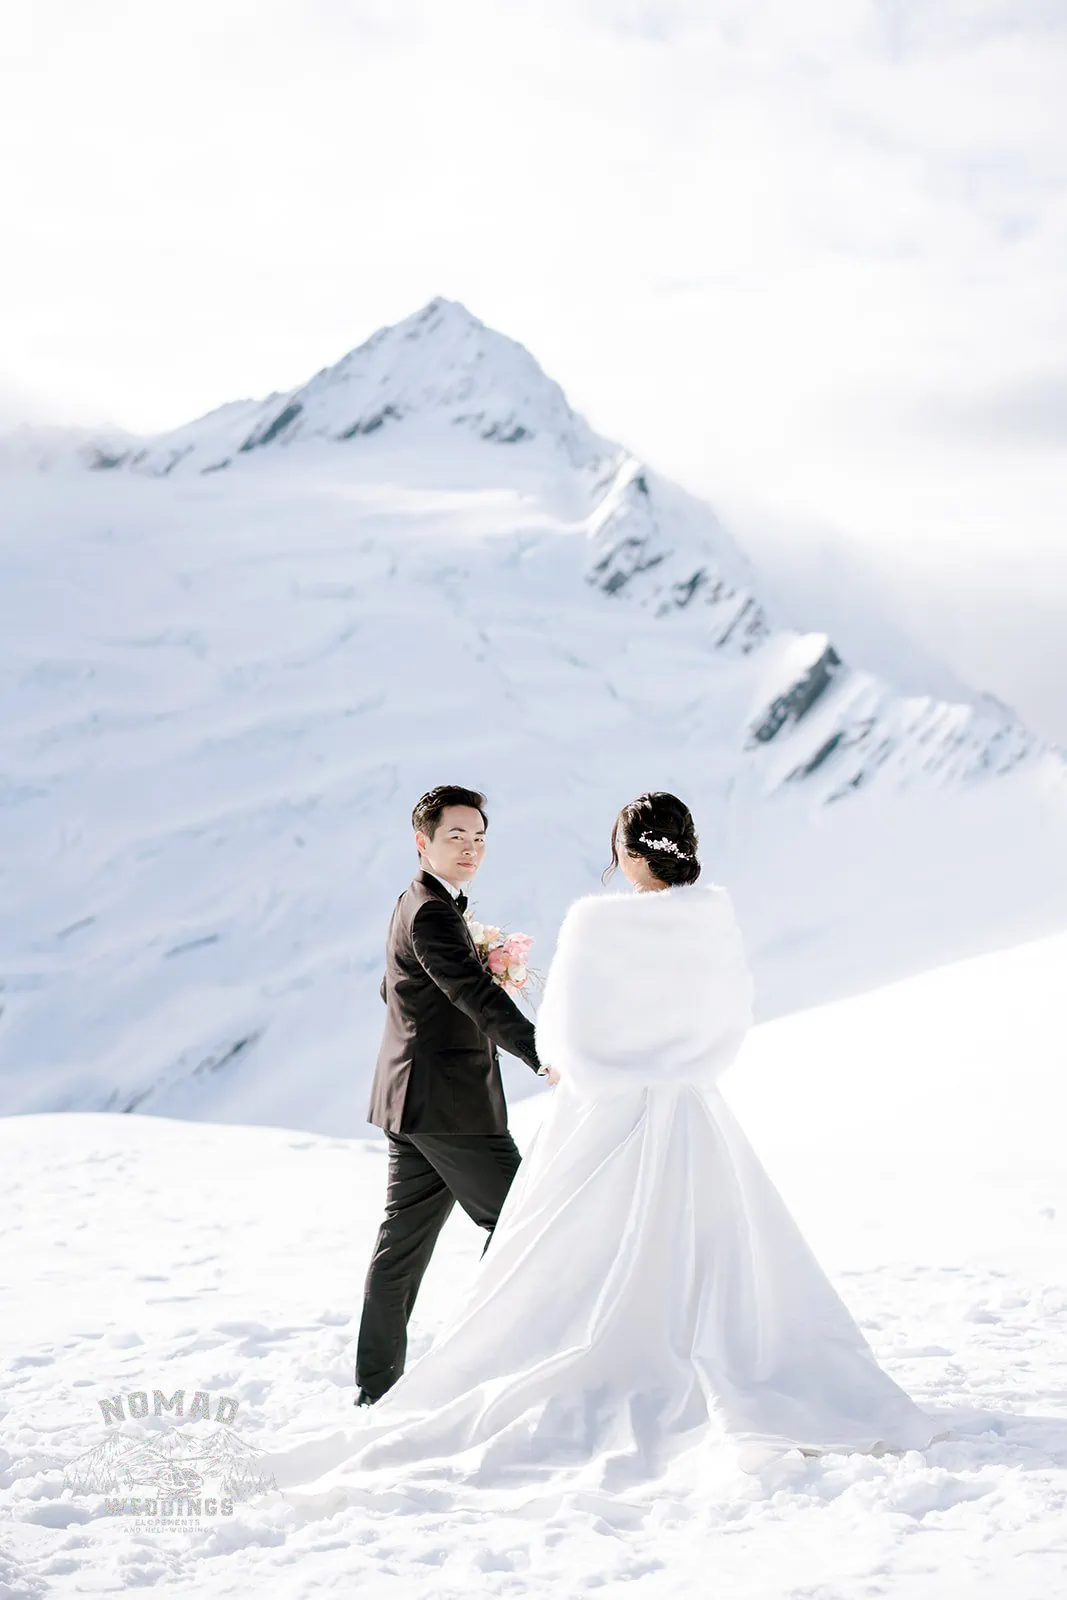 Queenstown New Zealand Elopement Wedding Photographer - A bride and groom, Bo and Junyi, have a breathtaking Heli Pre Wedding Shoot on a snow covered mountain with 4 landings.